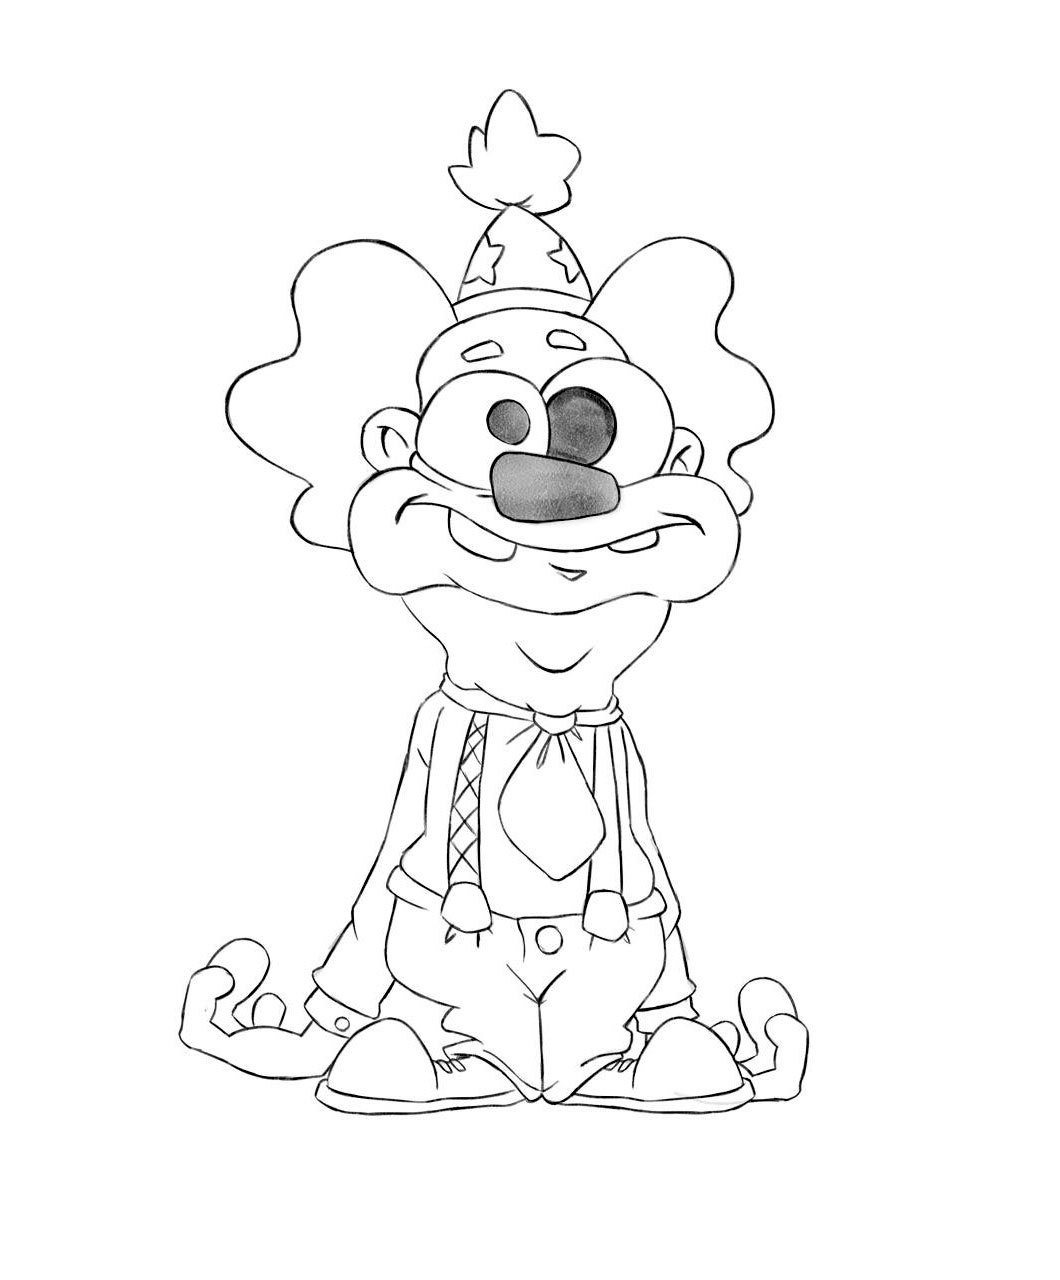 Stupid Clown Game Character Drawing Sketch